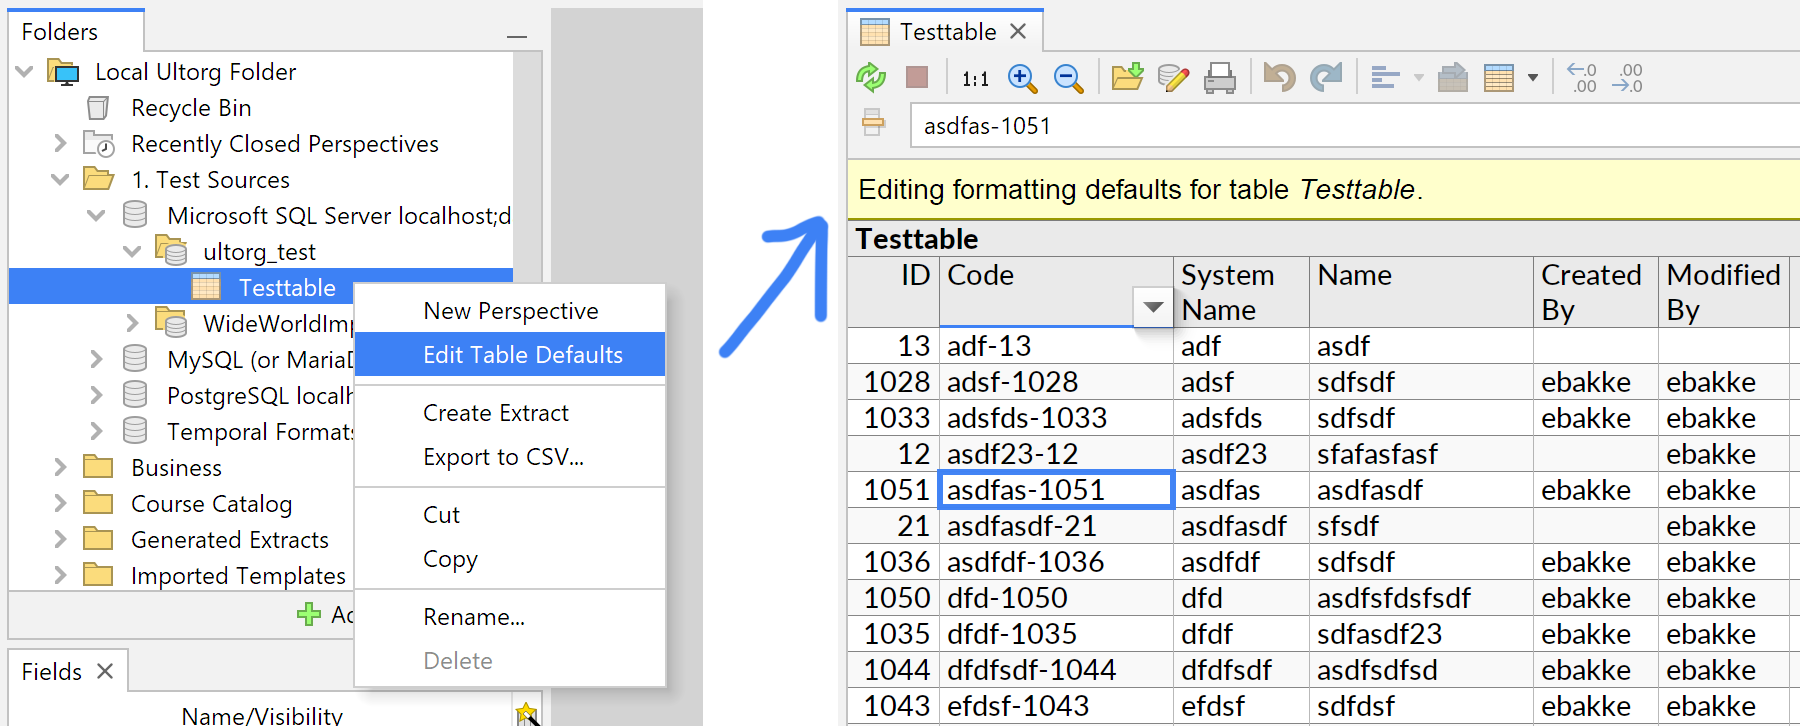 Screenshot showing the Edit Table Defaults action.